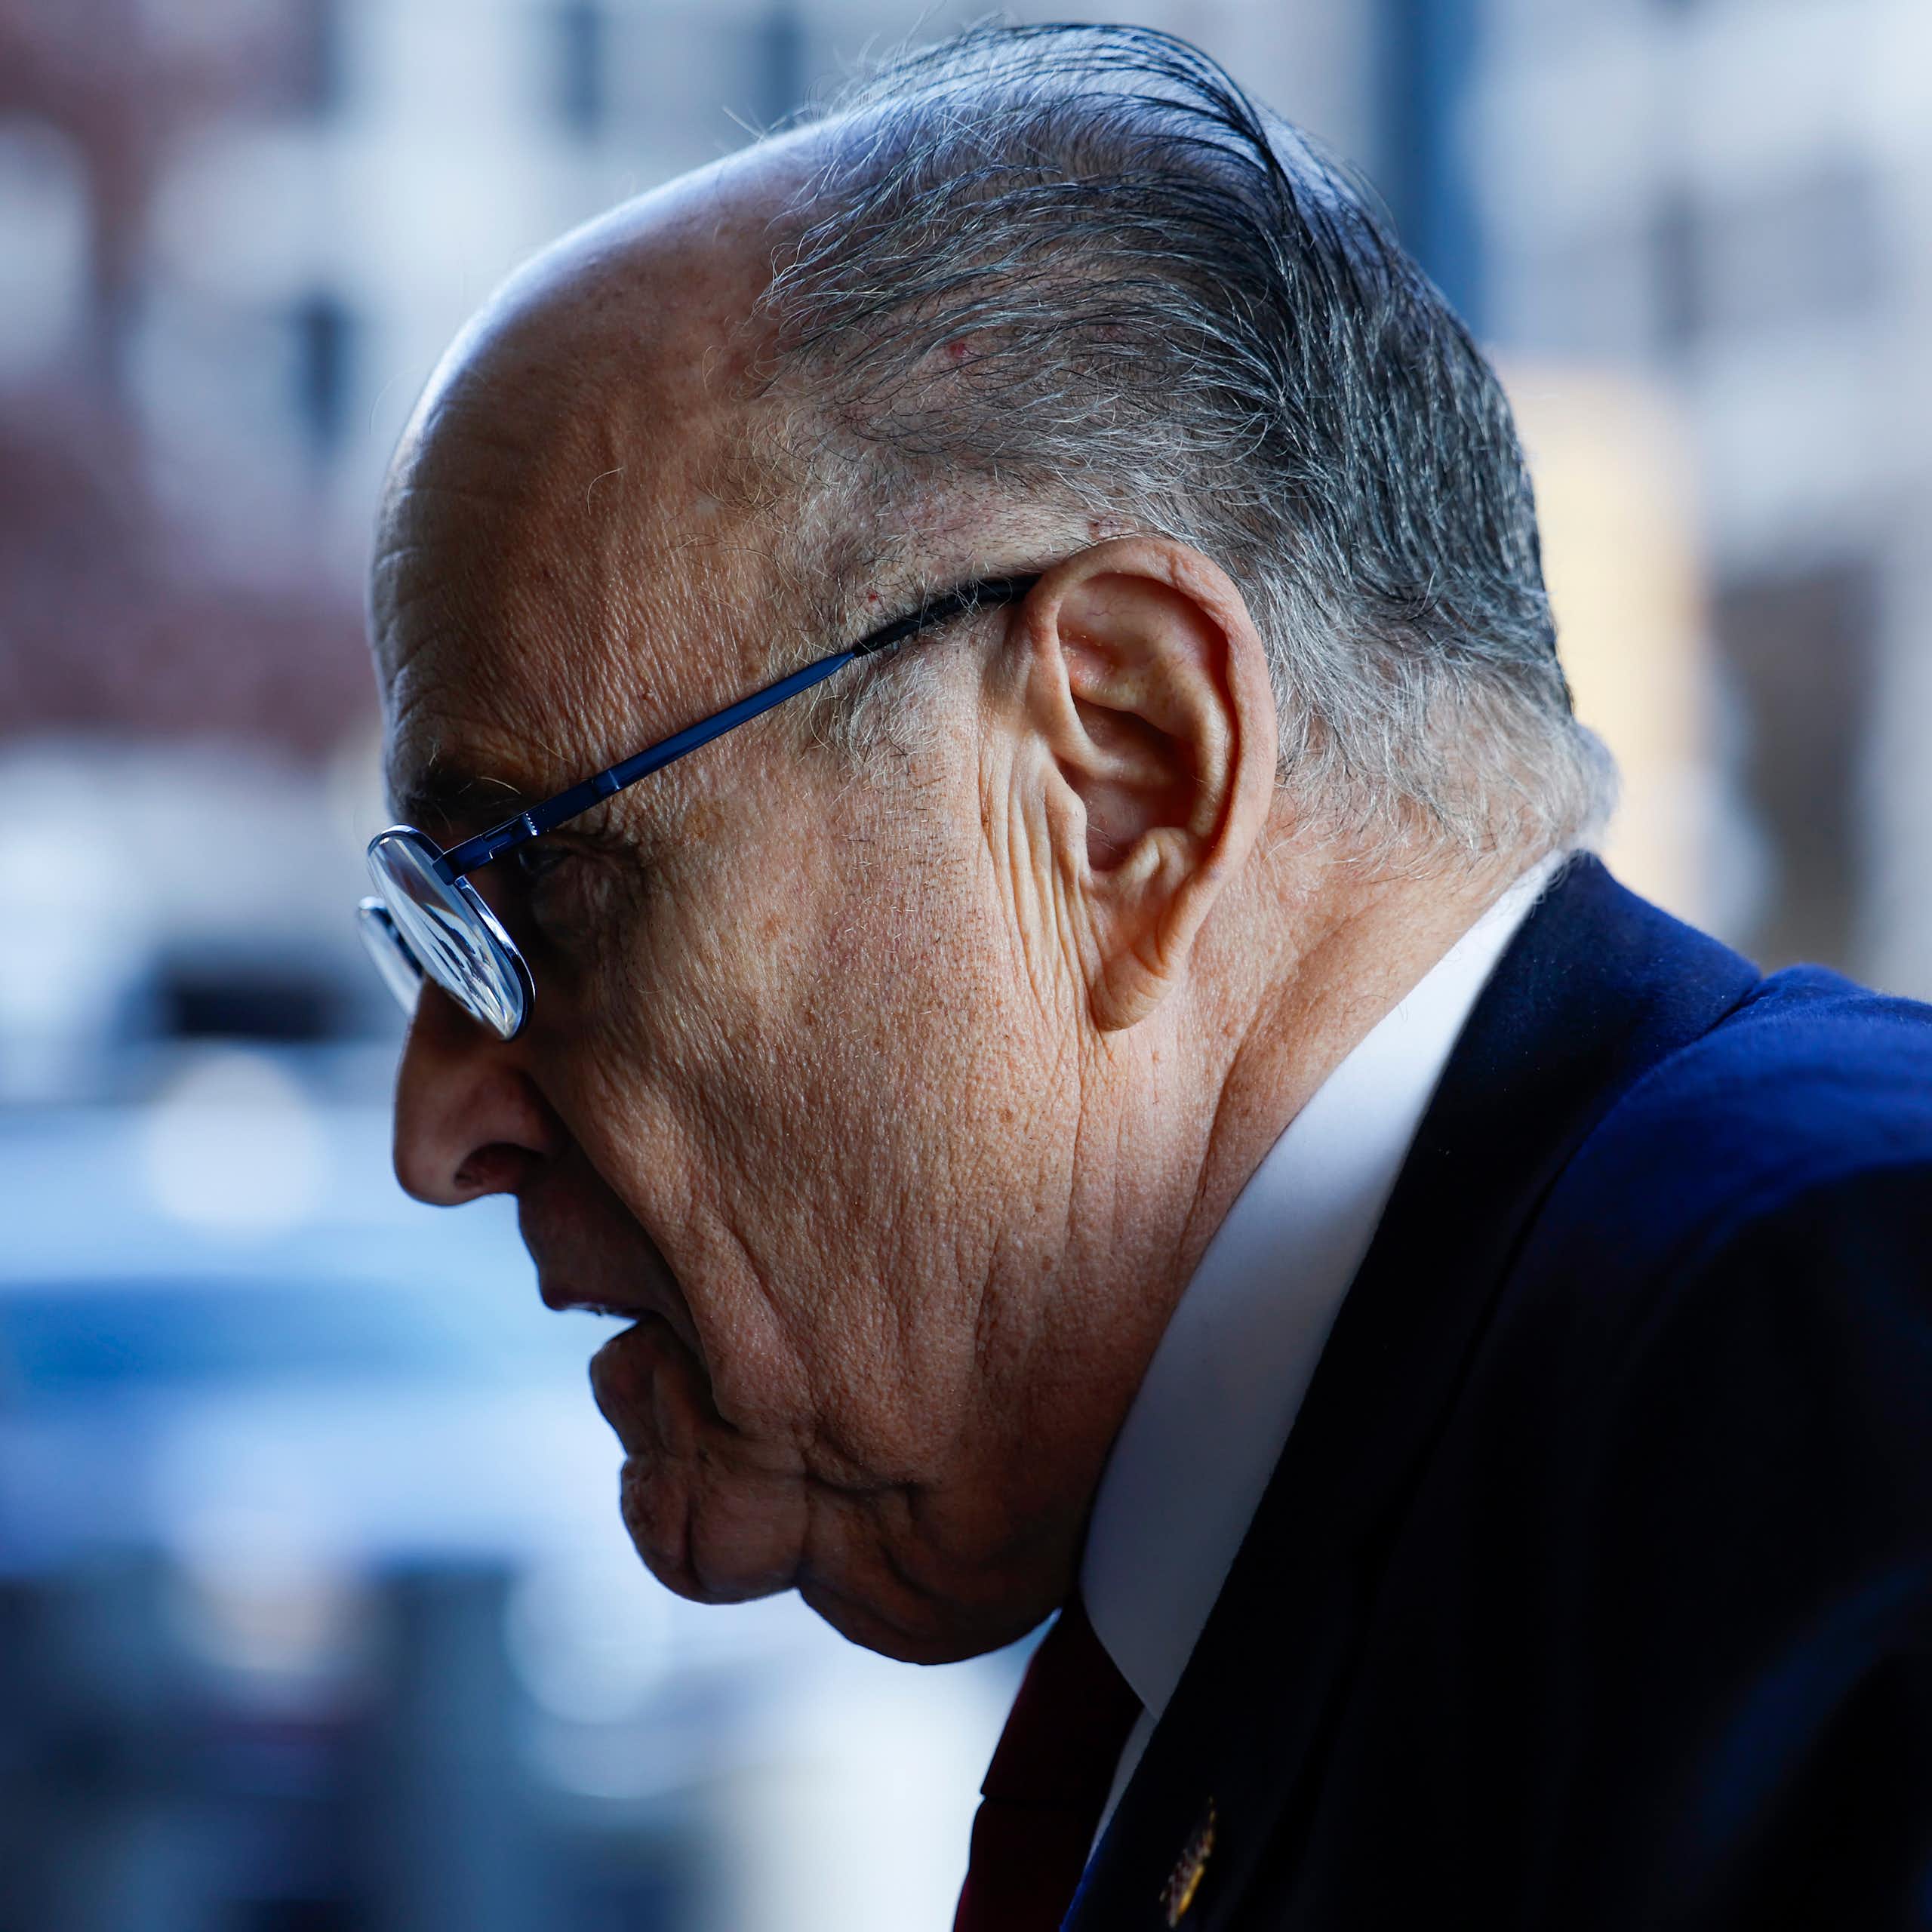 A balding man with glasses in a blue jacket, seen in profile.